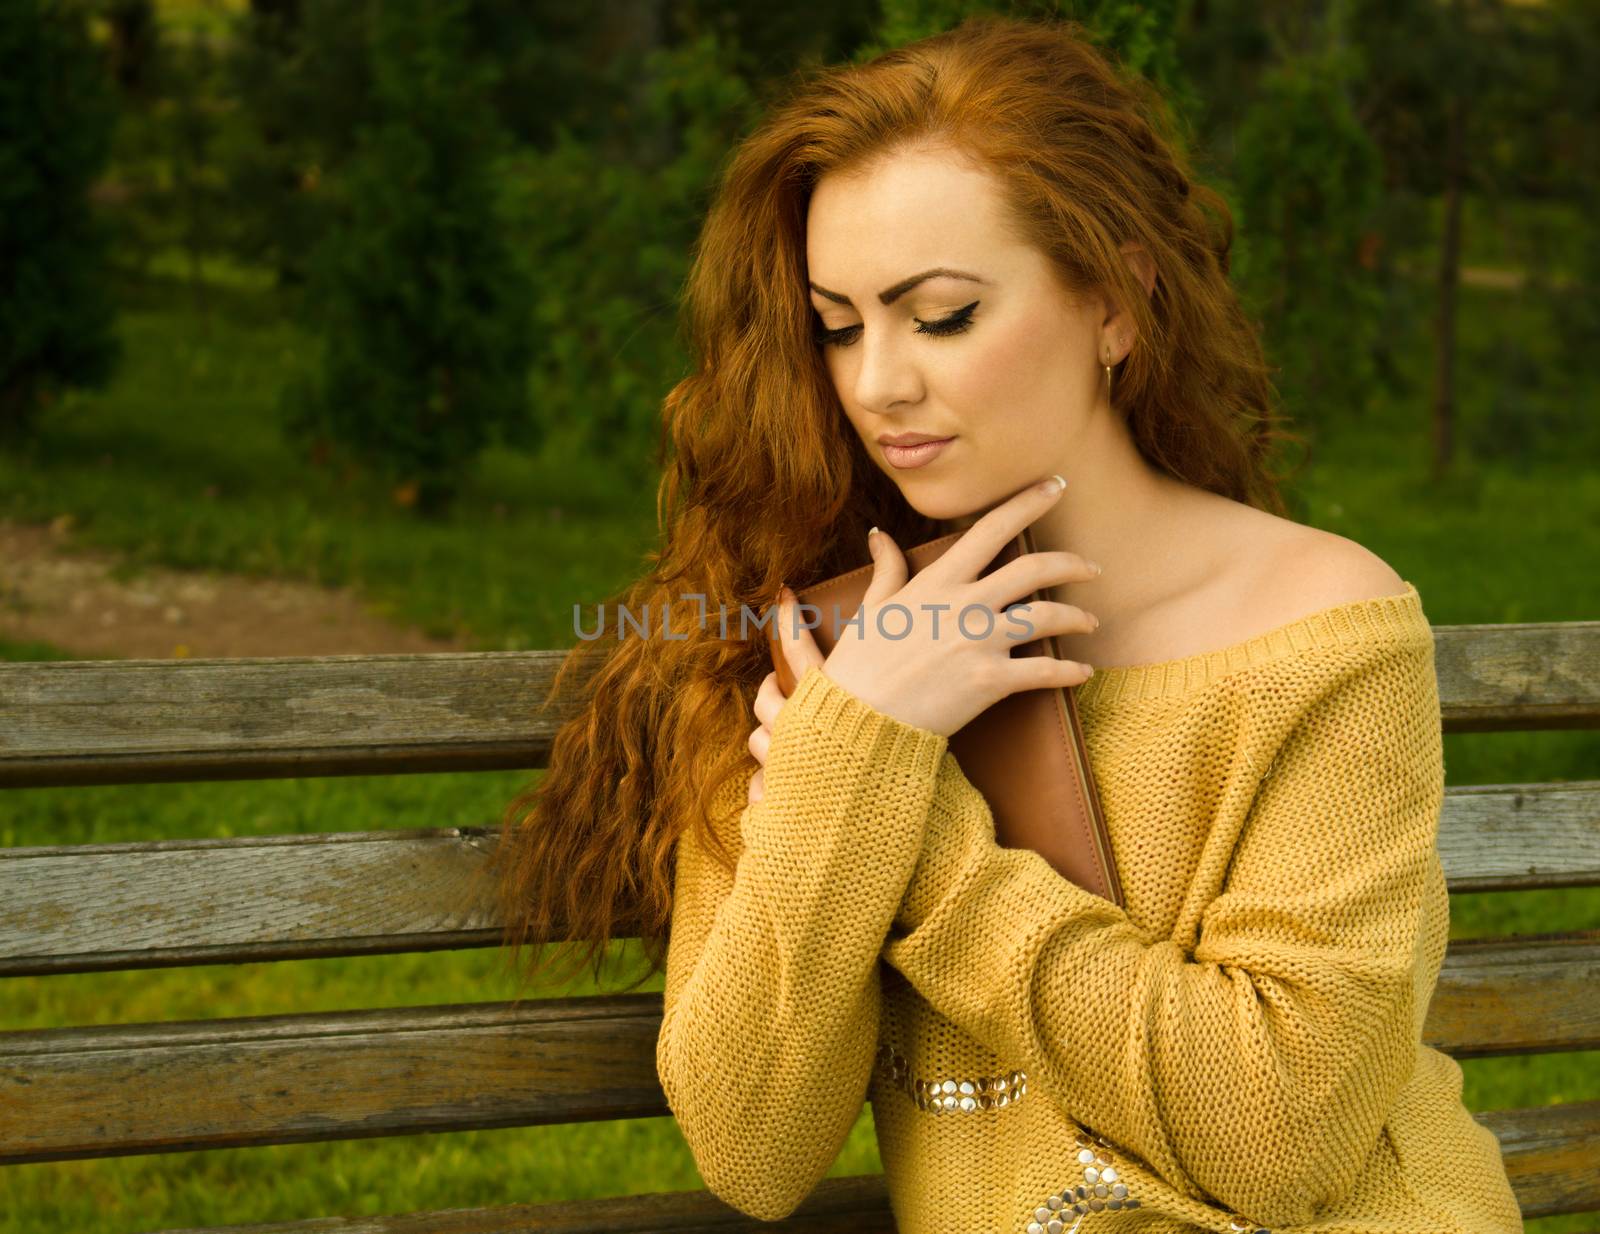 Ginger-haired woman sitting on a bench with book by id7100